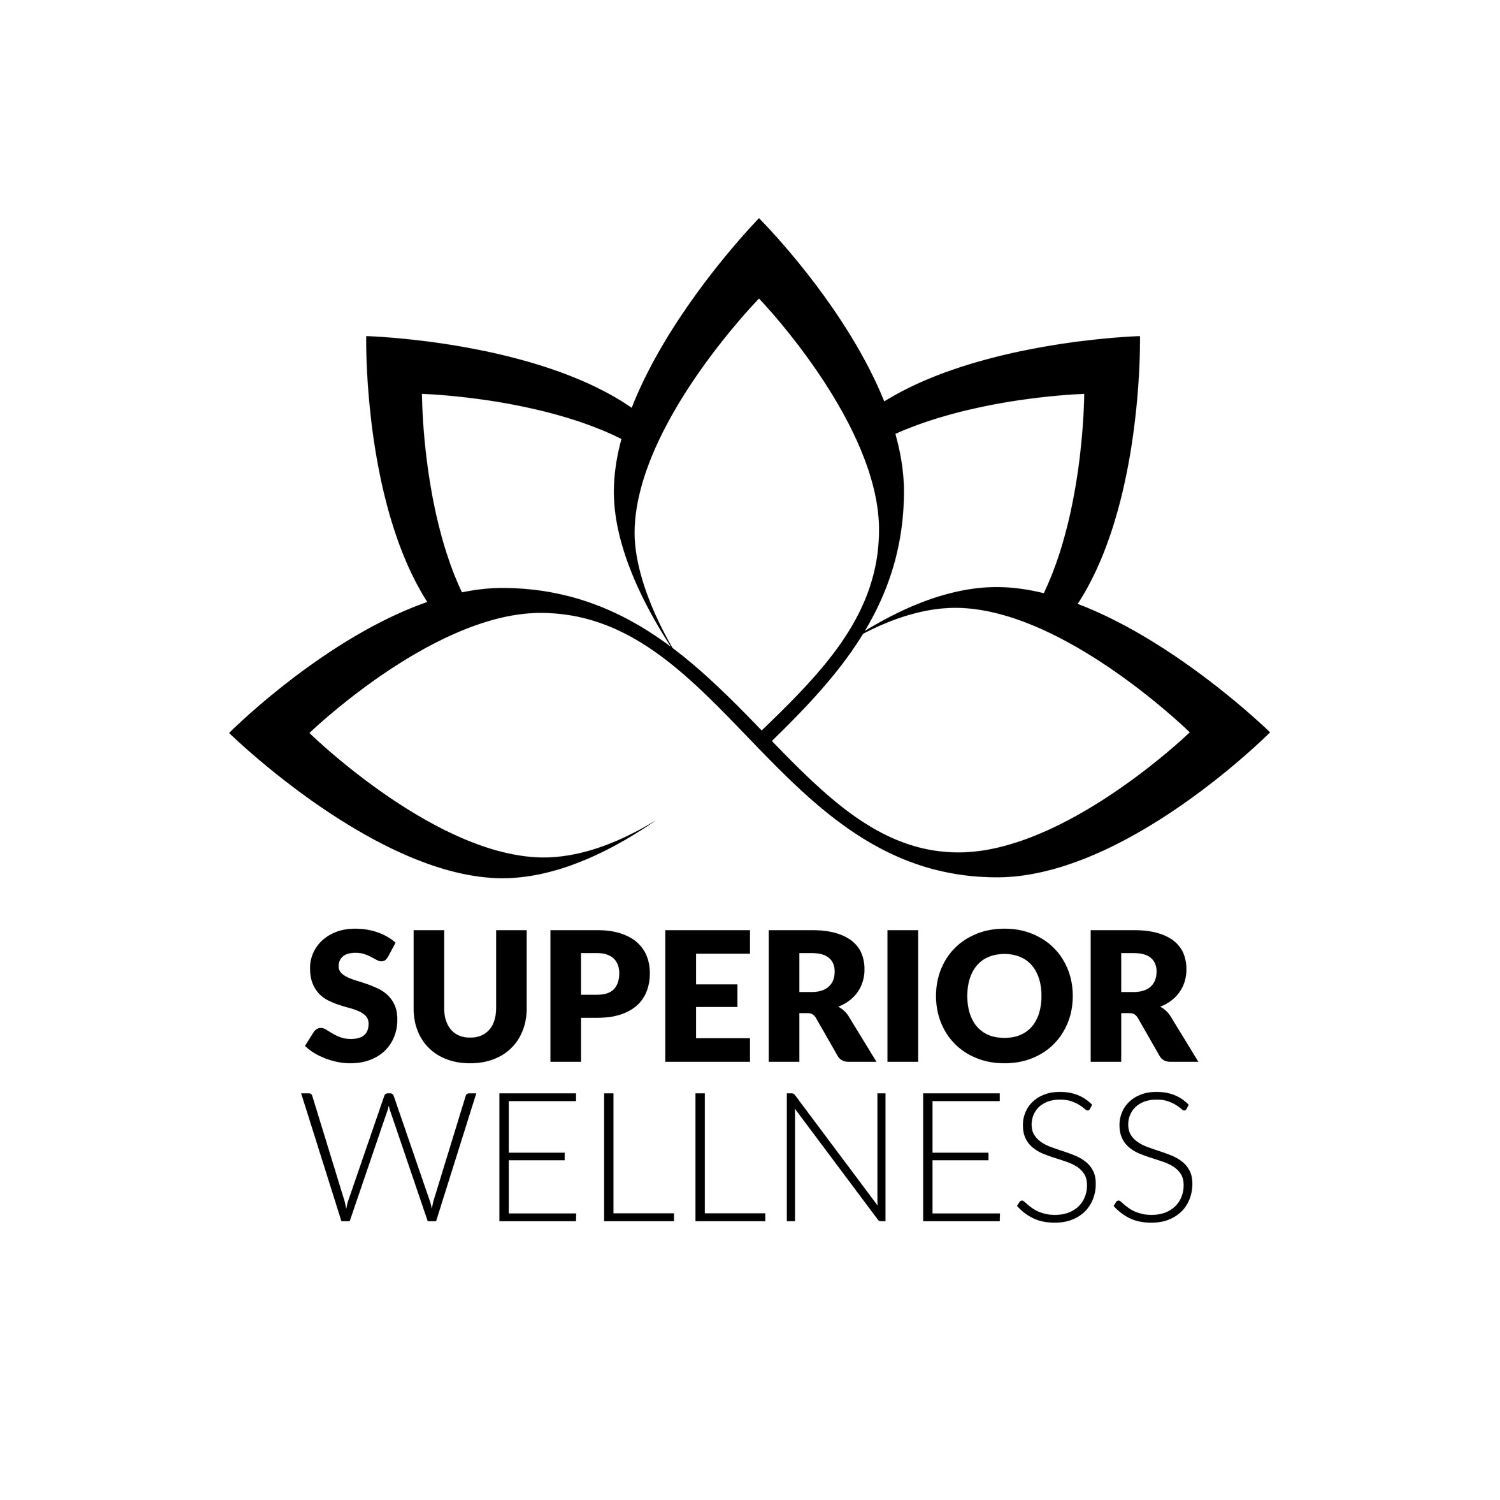 SUPERIOR WELLNESS - recognised for sustainability